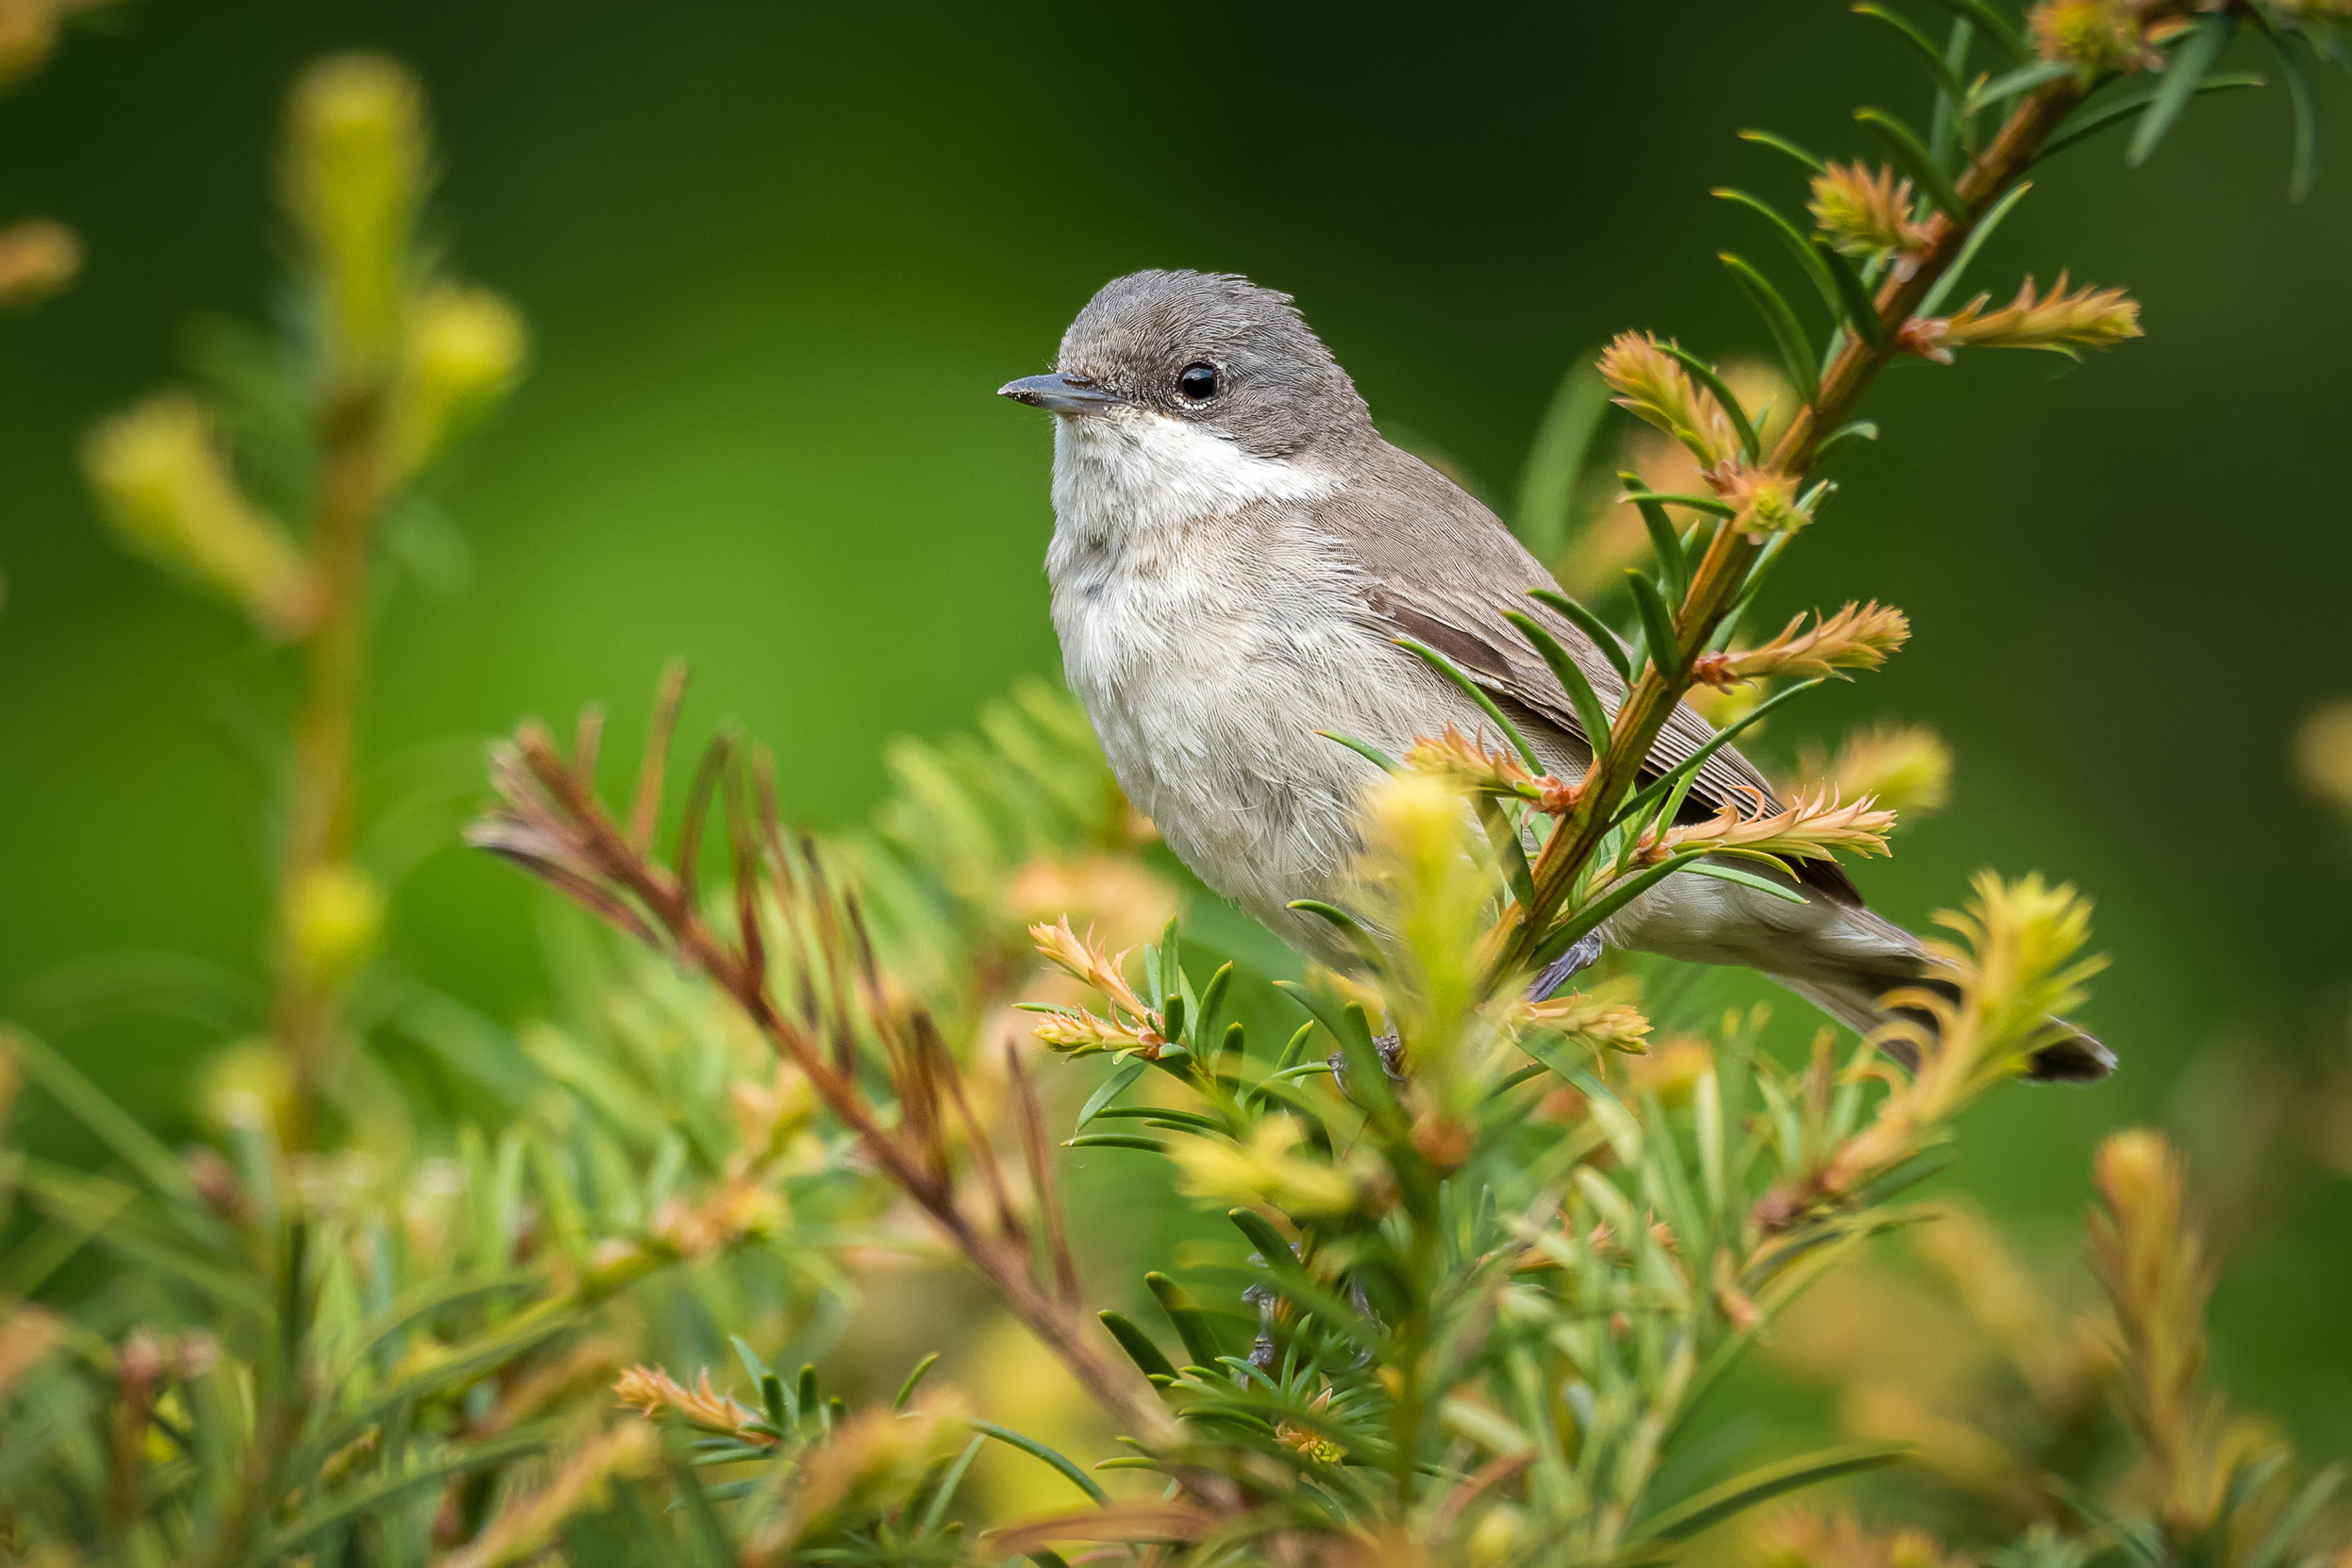 A lone Lesser Whitethroat adult sat on a tree branch surrounded by pine leaves.